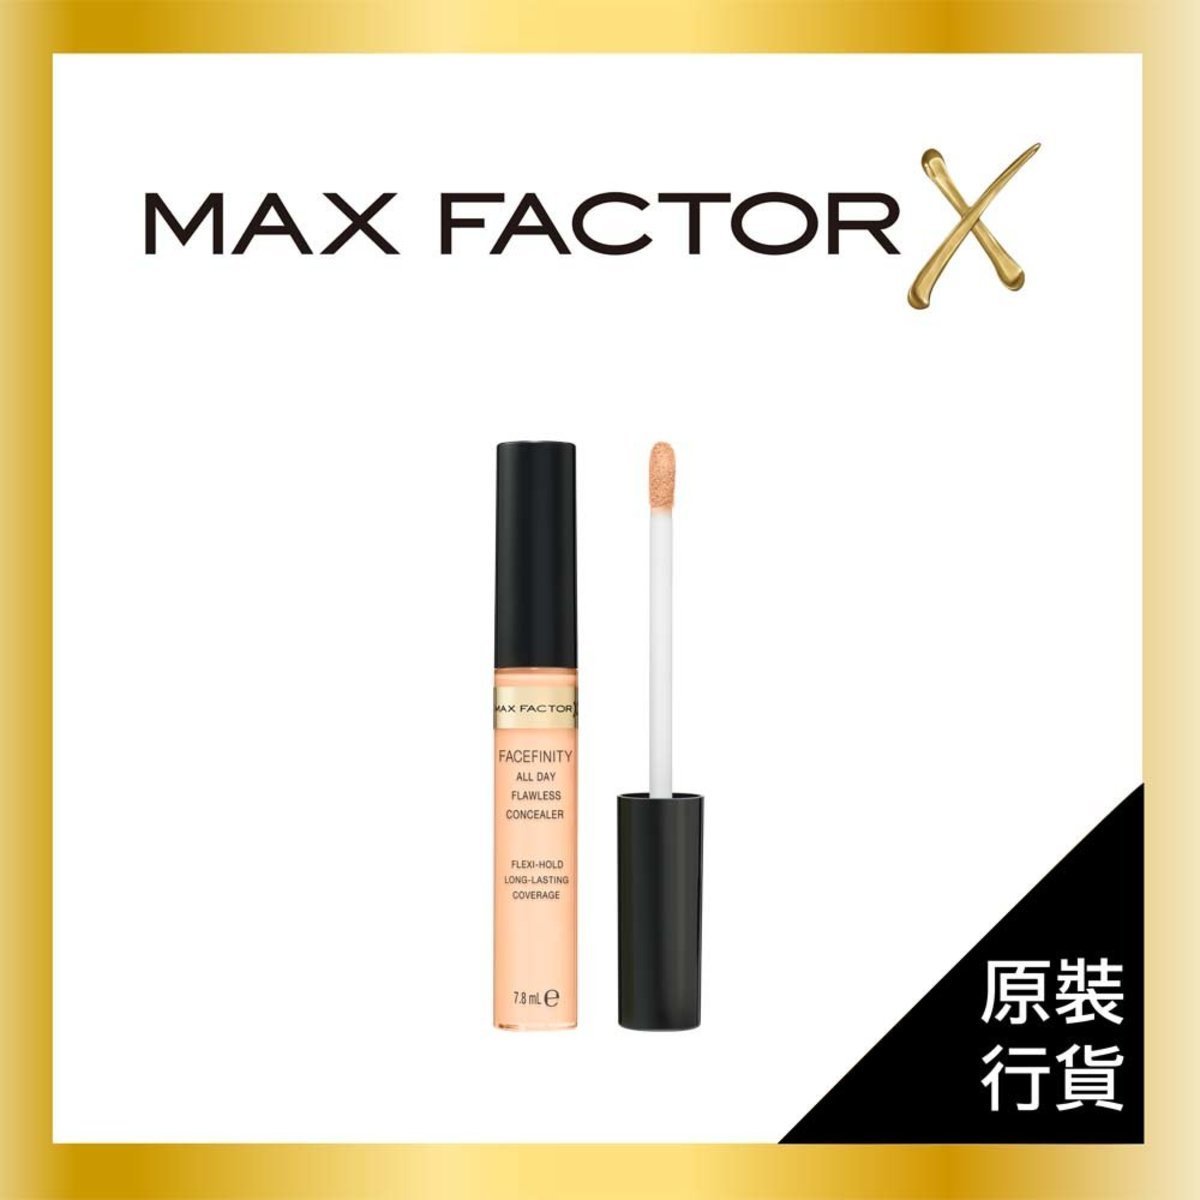 Max Factor | Facefinity All Day Flawless Concealer 010 | Color : 10 |  HKTVmall The Largest HK Shopping Platform